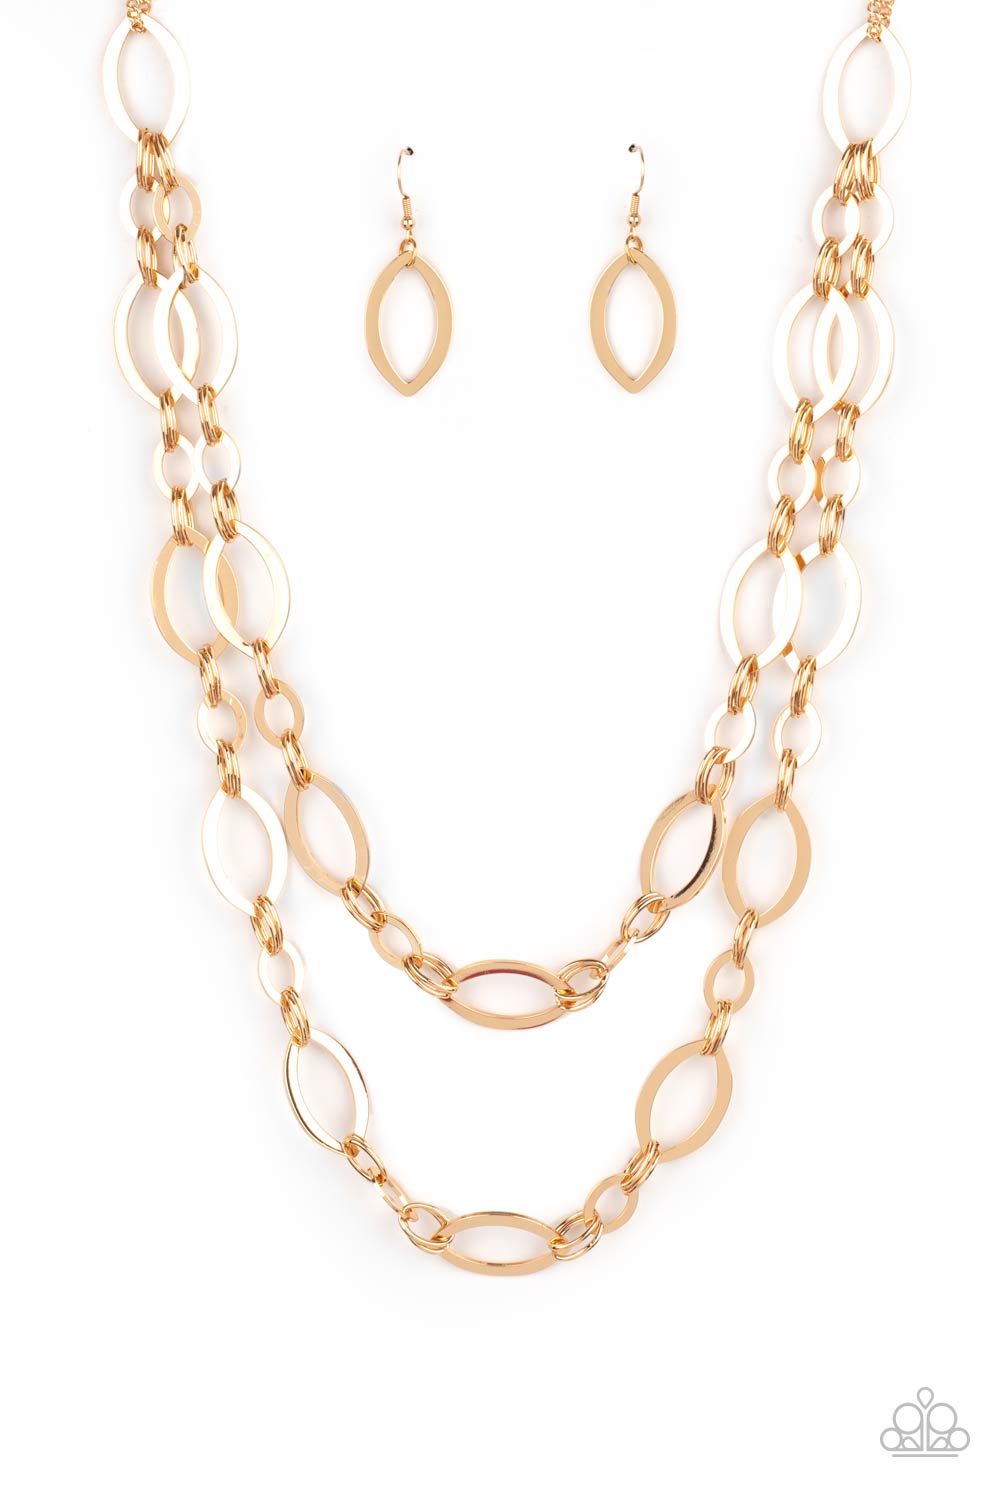 The OVAL-achiever - Gold Necklace - Paparazzi Accessories - Paparazzi Accessories 